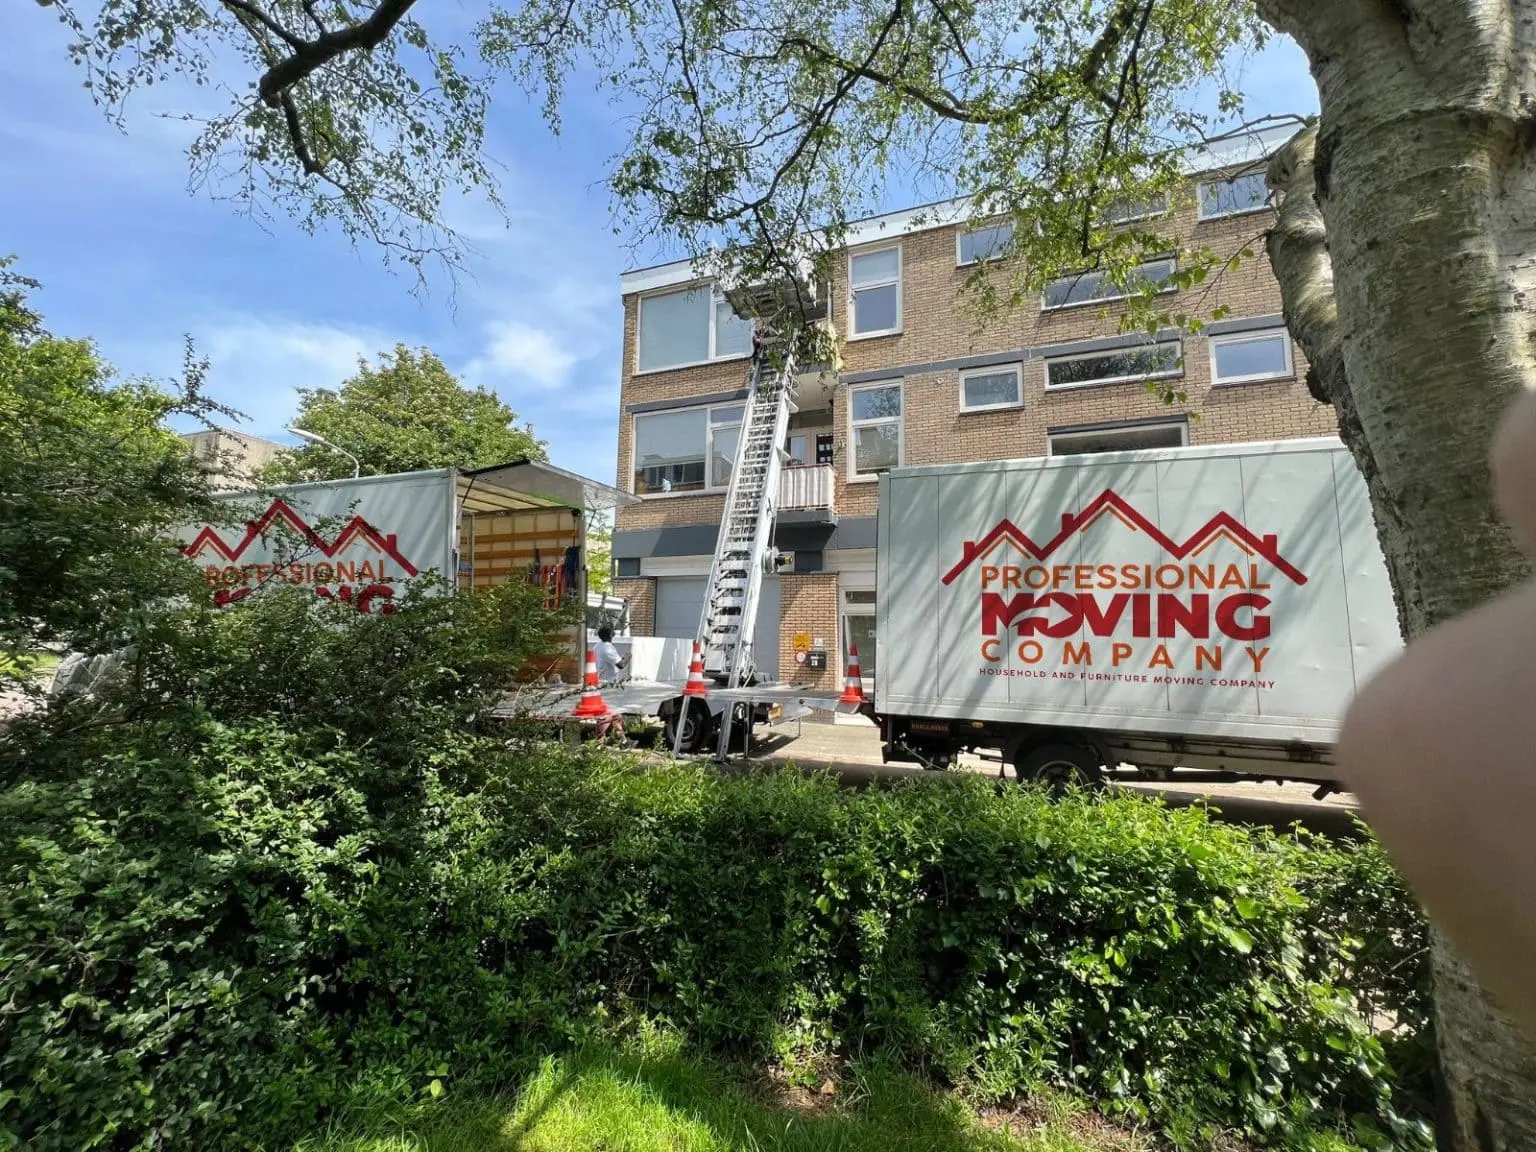 What We Offer | Moving Company Uitgeest